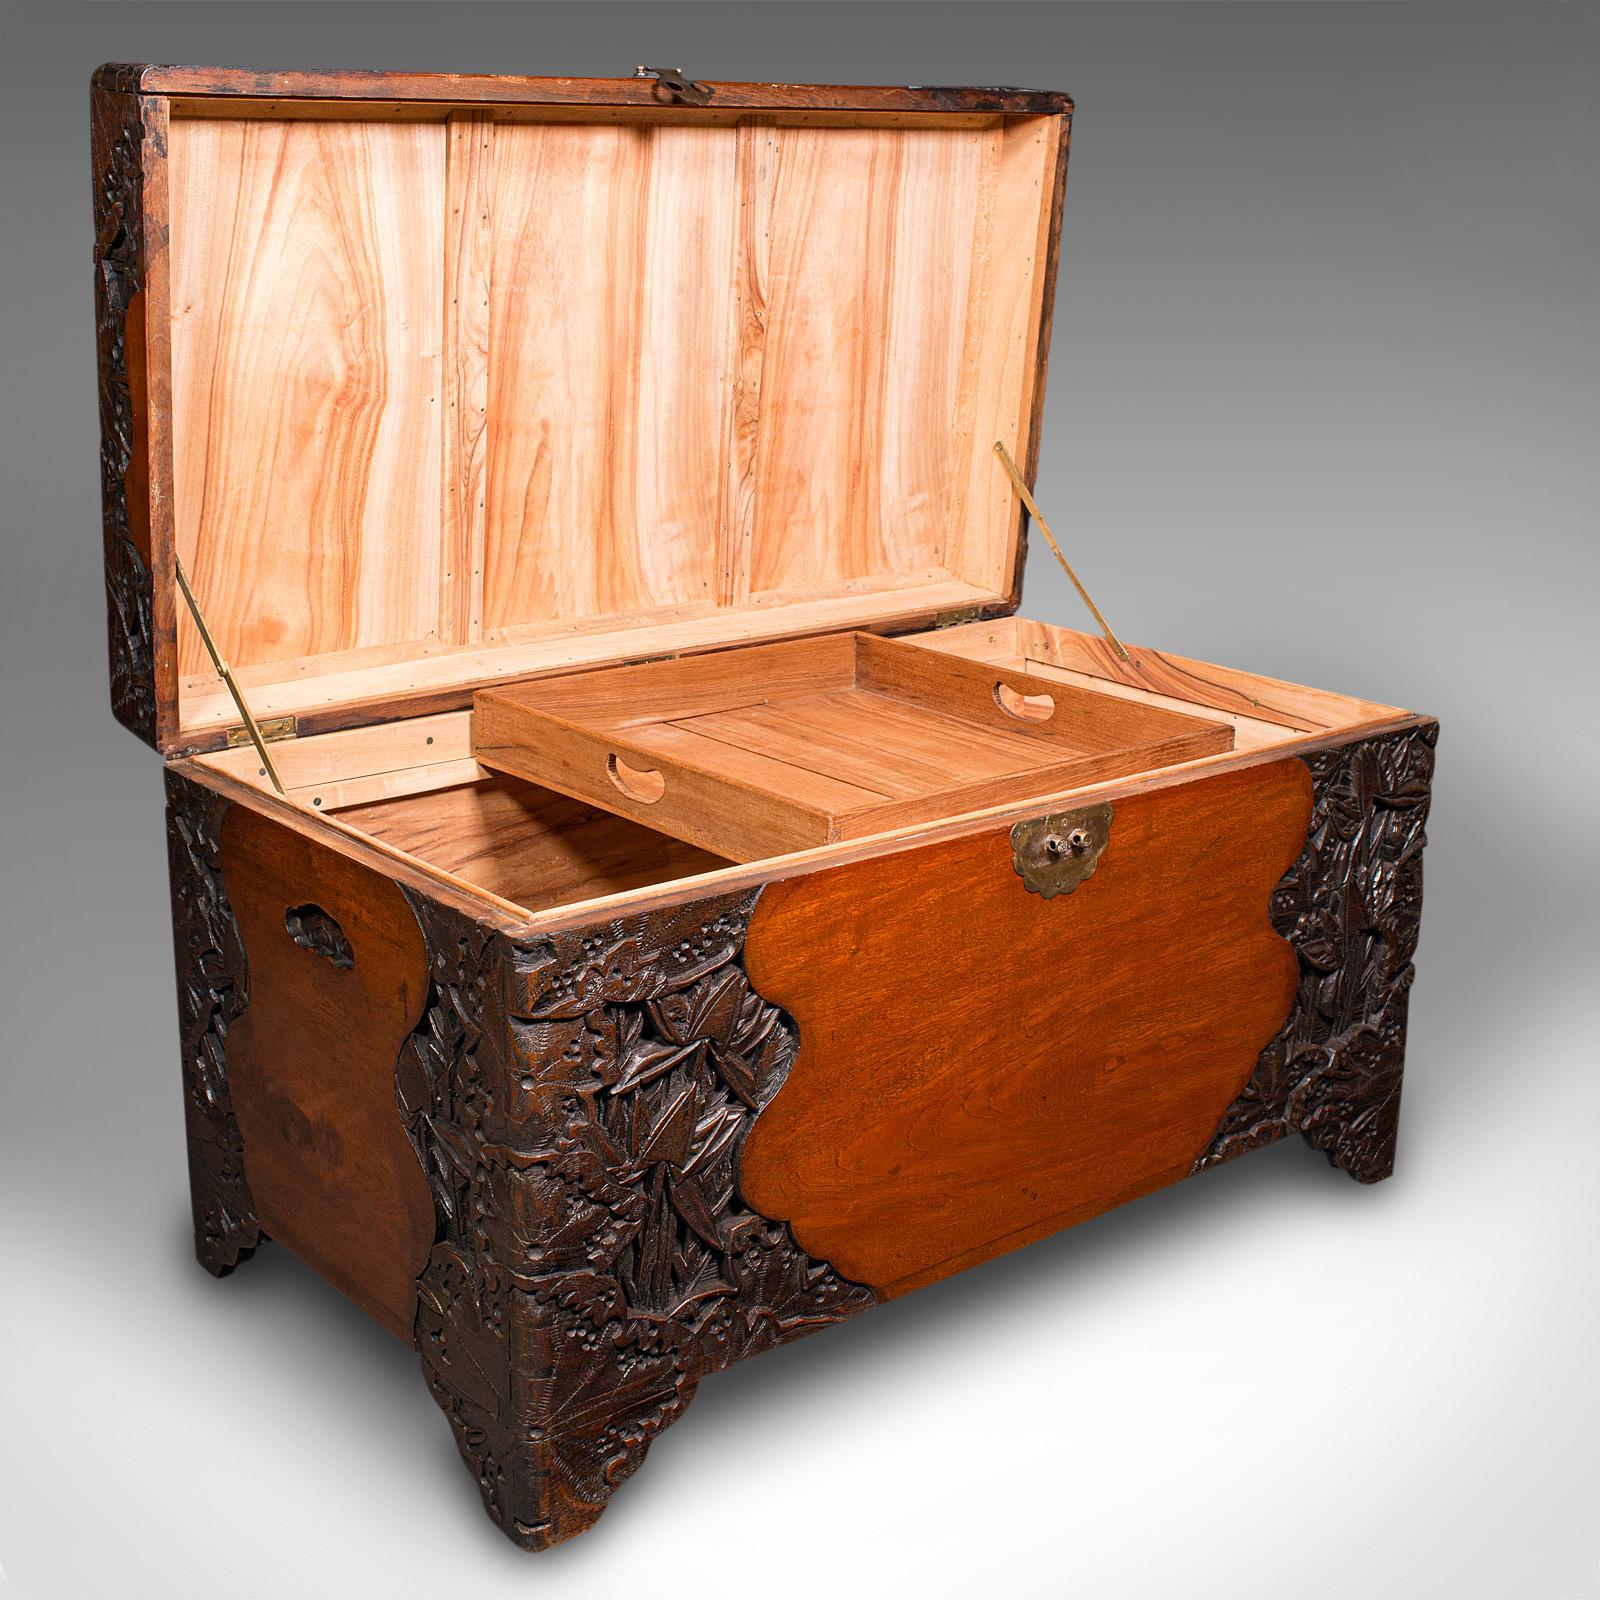 This is a large vintage carved linen chest. An Oriental, teak and camphorwood trunk with Art Deco taste, dating to the early 20th century, circa 1930. 

Exquisite craftsmanship, profusely carved and of substantial proportion
Displaying a desirable